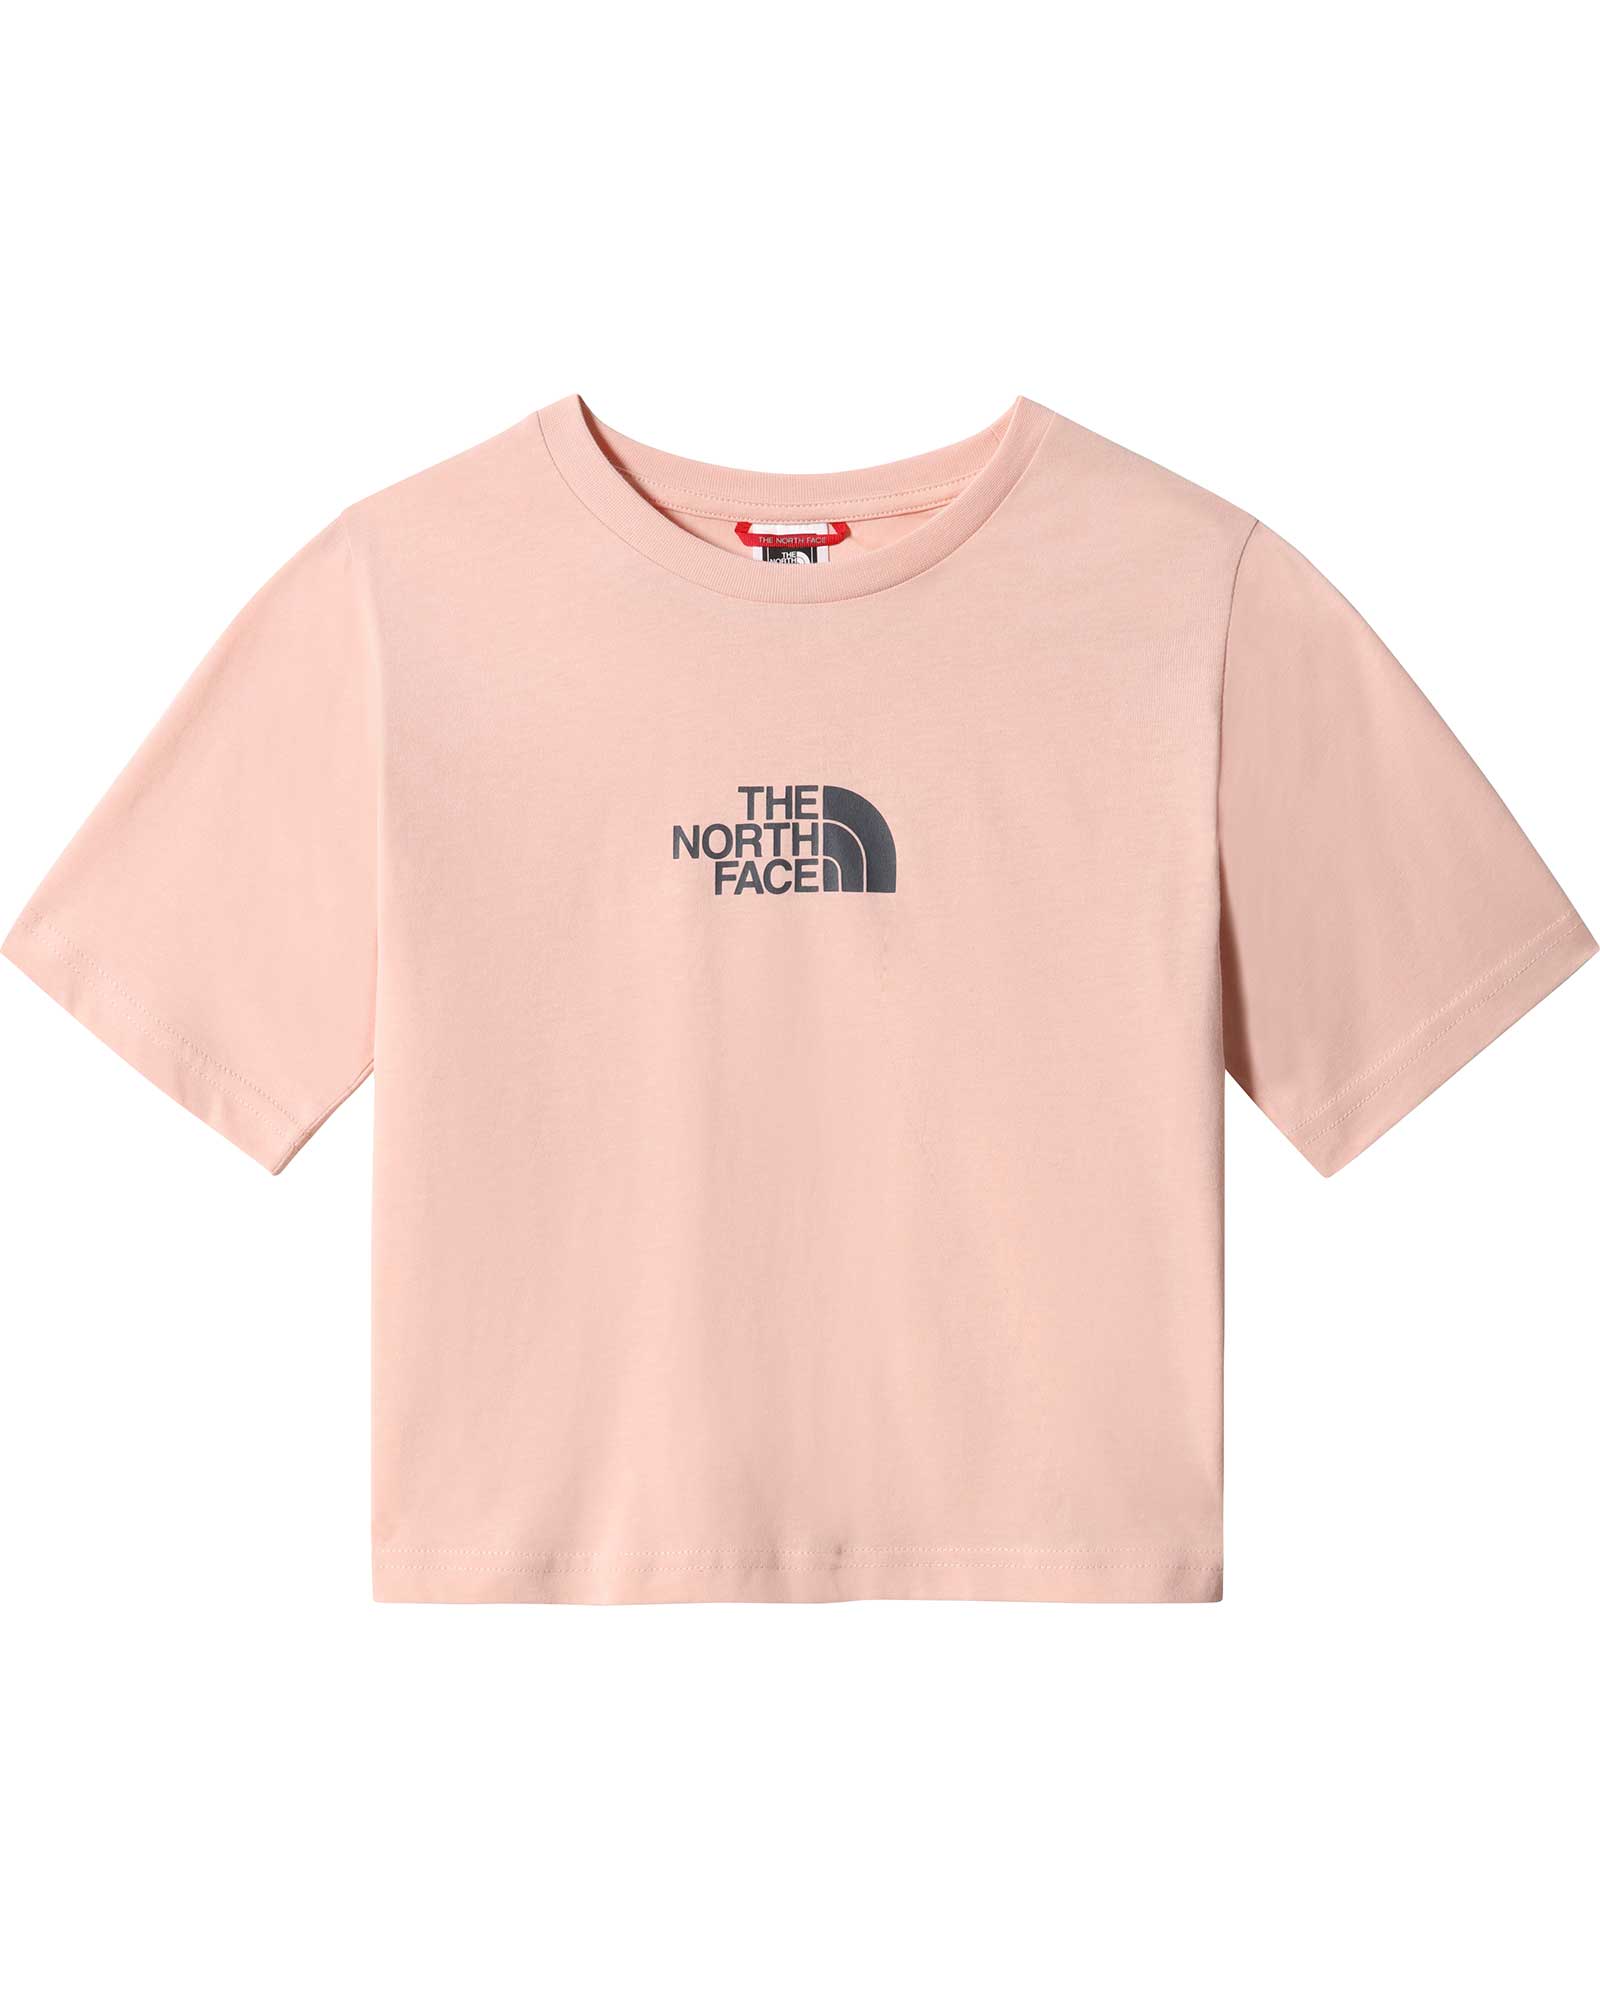 The North Face Cropped Graphic Girls T-shirt